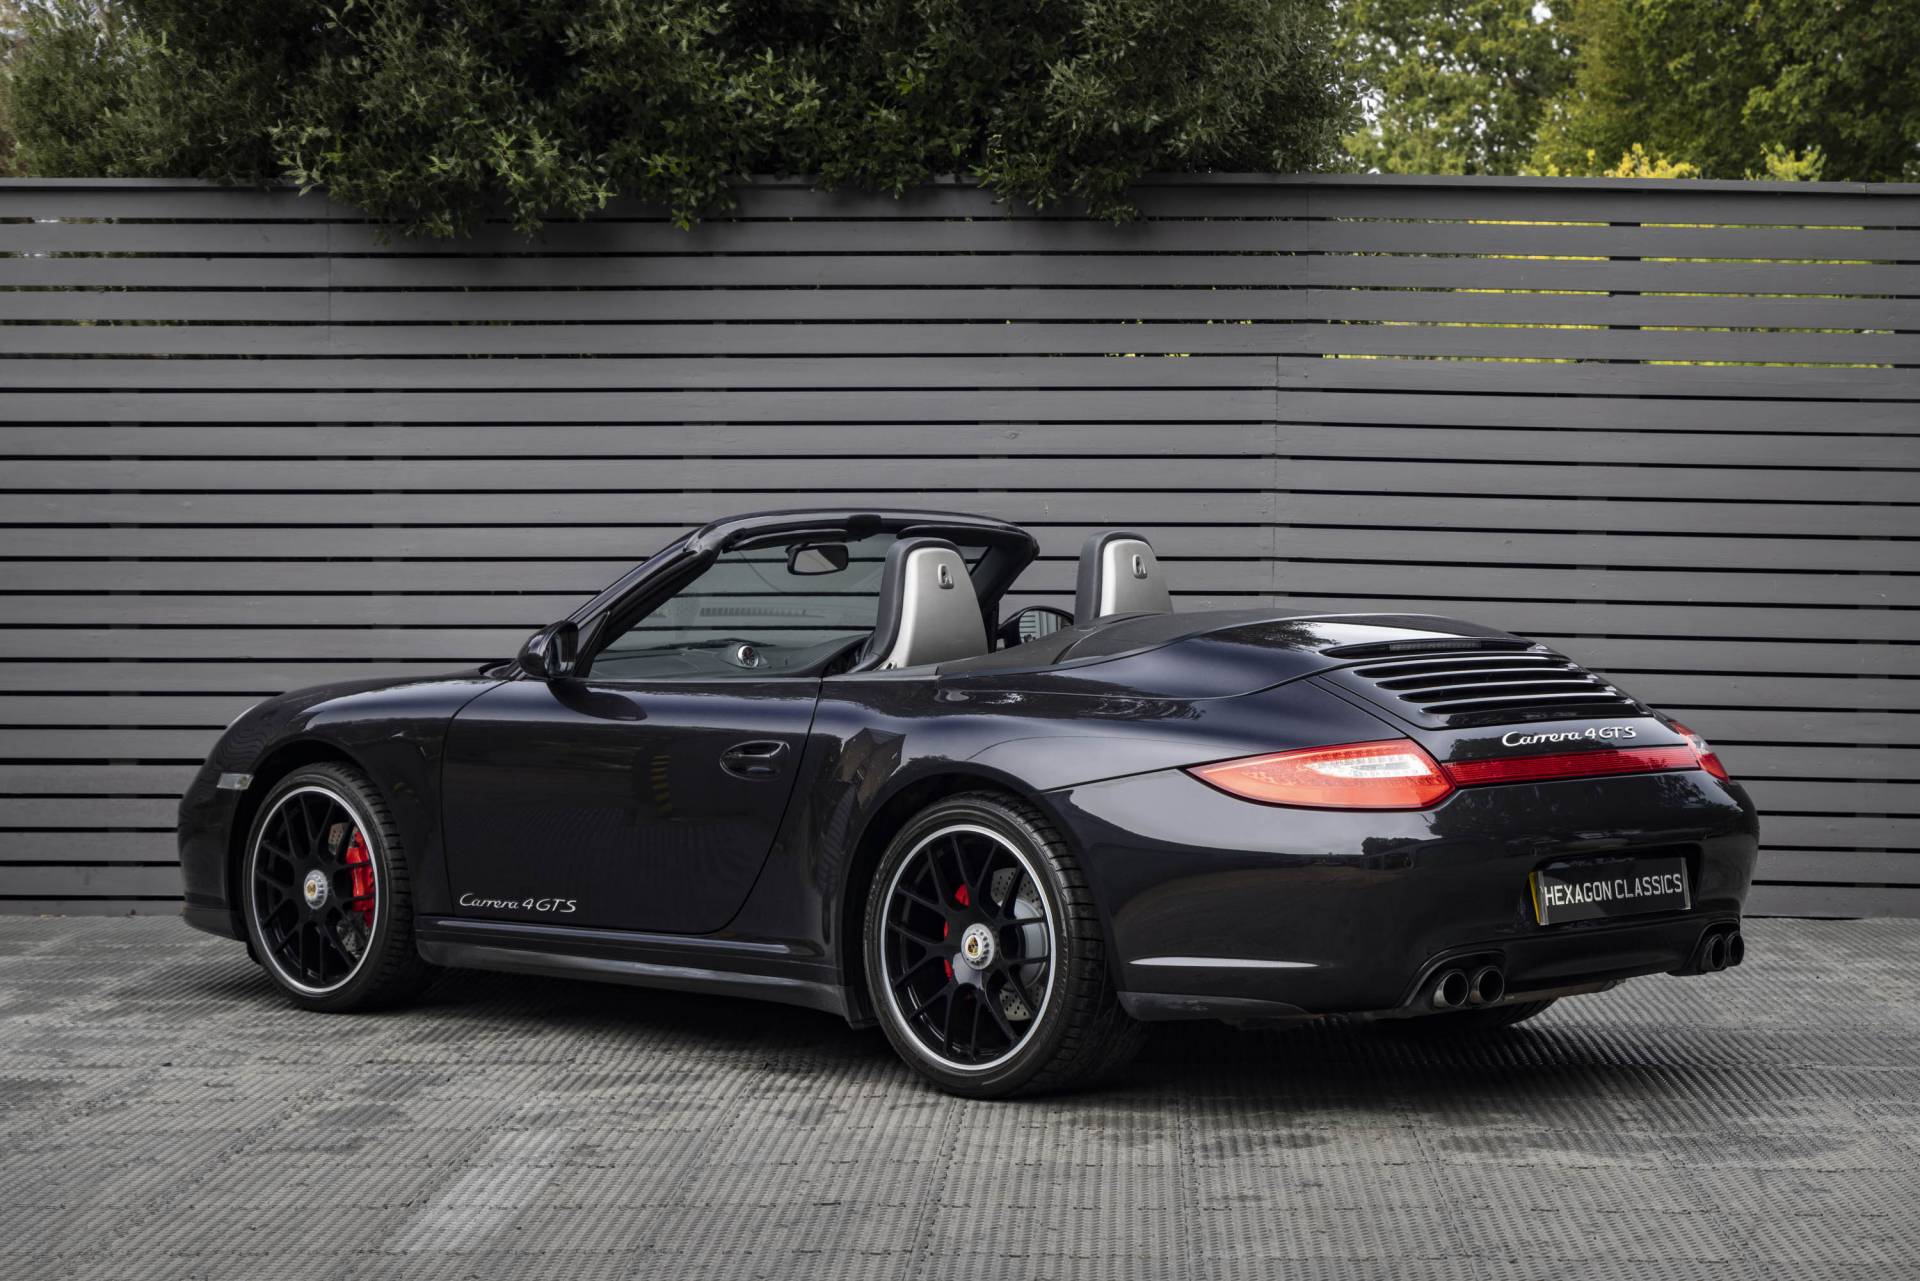 For Sale: Porsche 911 Carrera 4 GTS (2012) offered for GBP 71,995